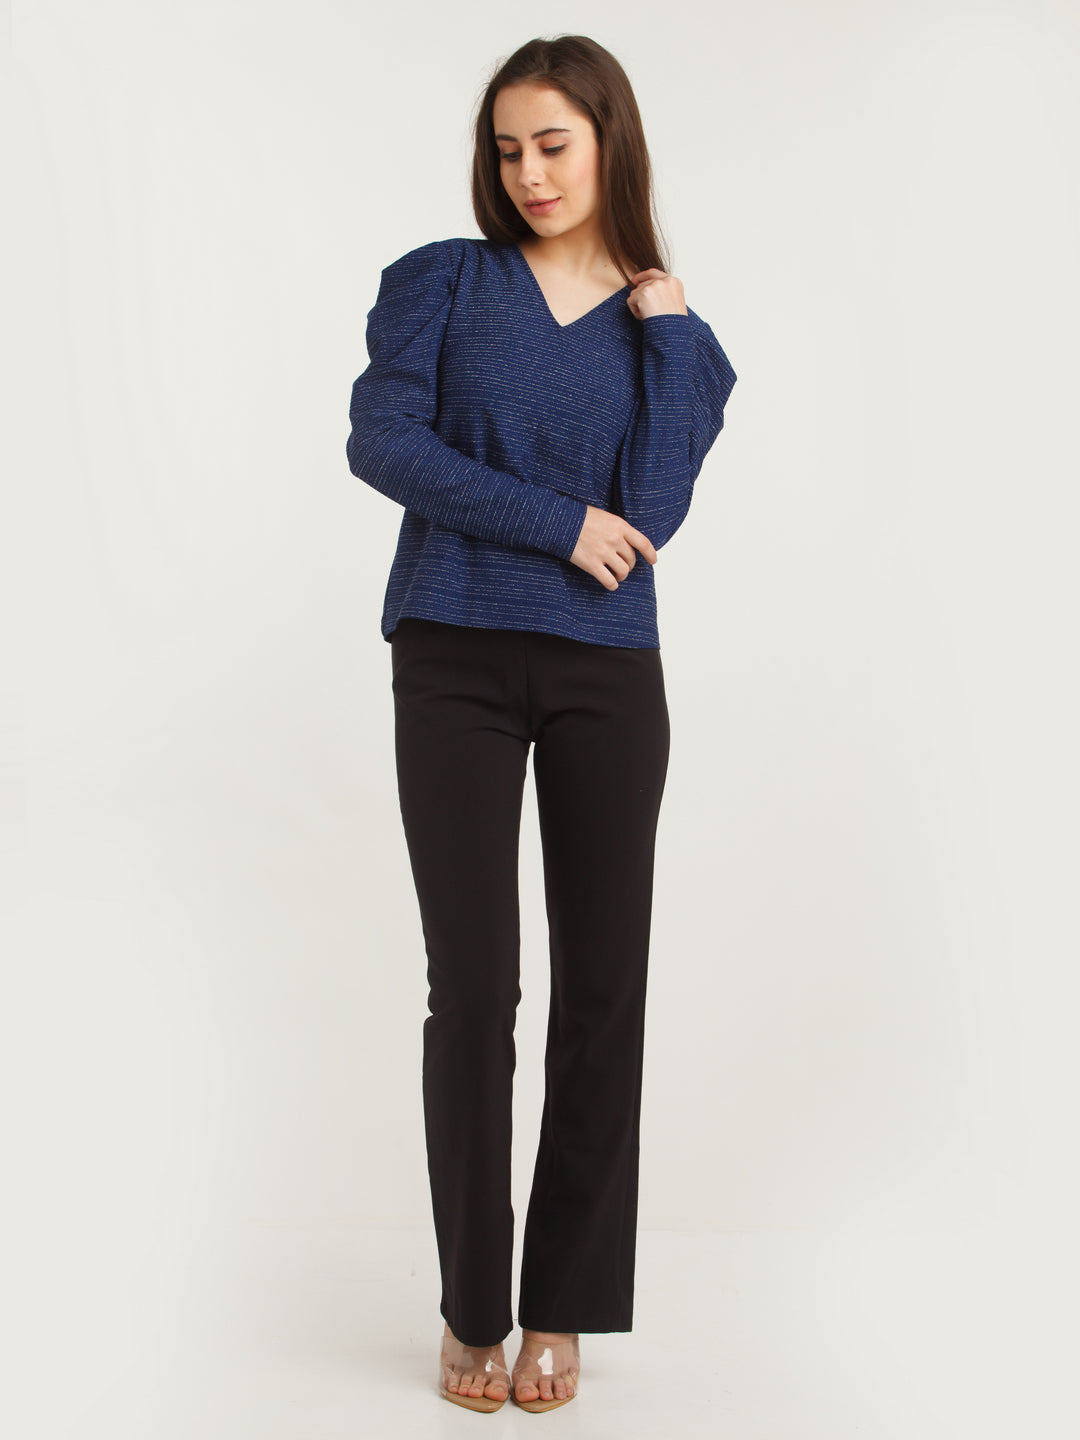 Navy Blue Embellished Puff Sleeve Top For Women